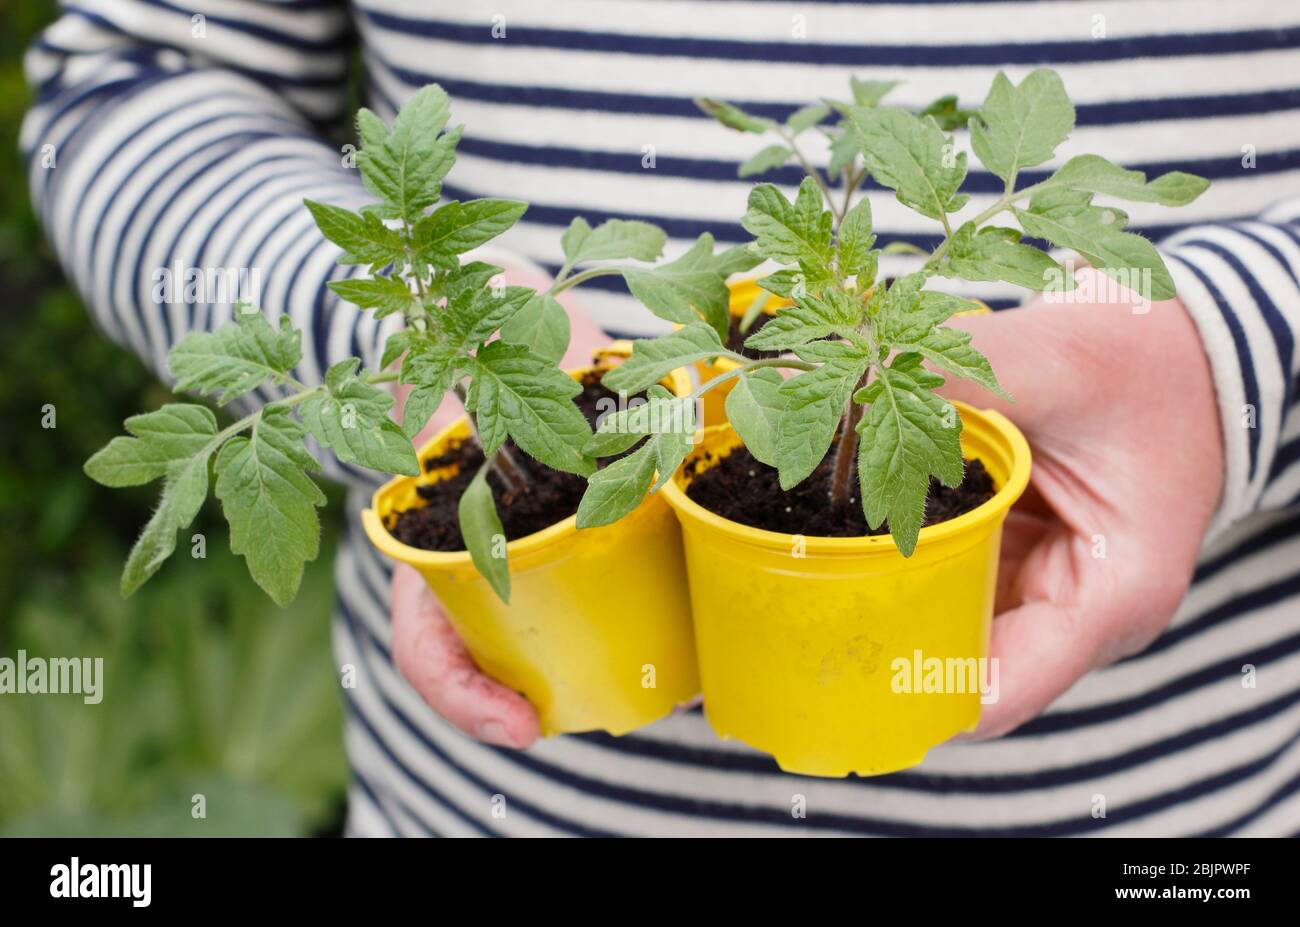 https://c8.alamy.com/comp/2BJPWPF/solanum-lycopersicum-golden-sunrise-young-home-grown-tomato-plants-in-resused-plastic-pots-ready-for-transplanting-into-a-pot-or-grow-bag-uk-2BJPWPF.jpg